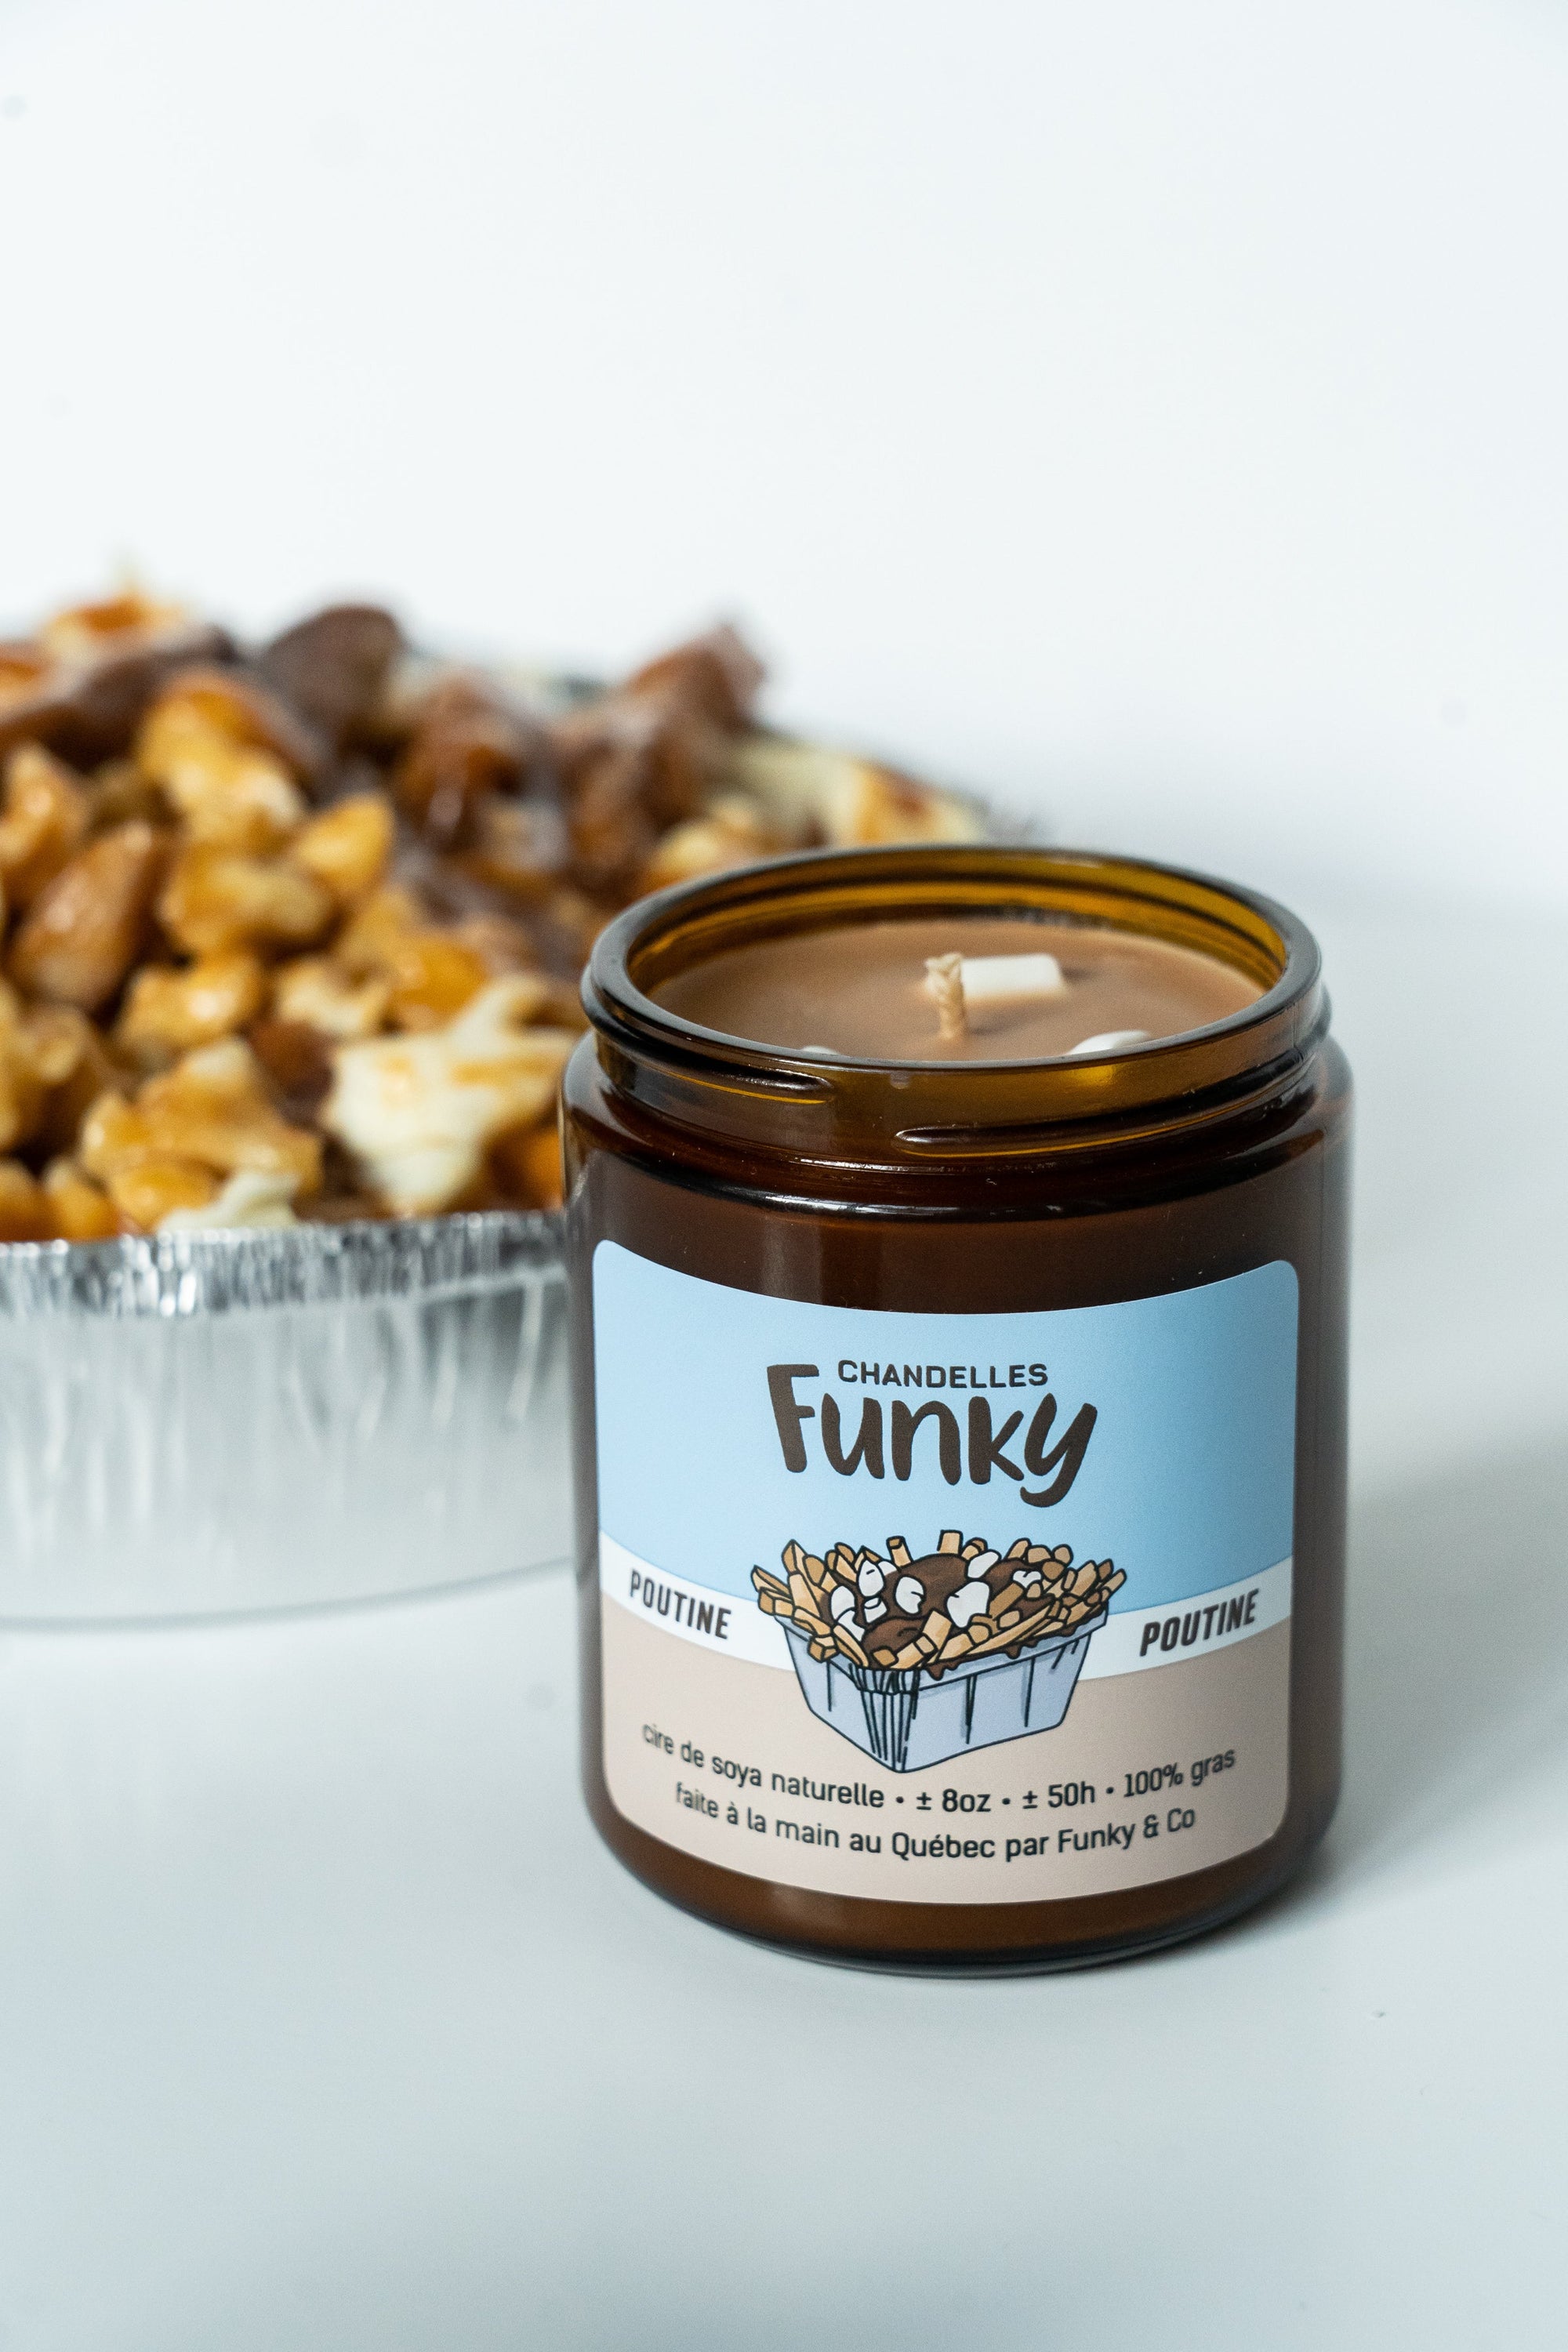 Chandelle Poutine - Funky - Funky & Co.